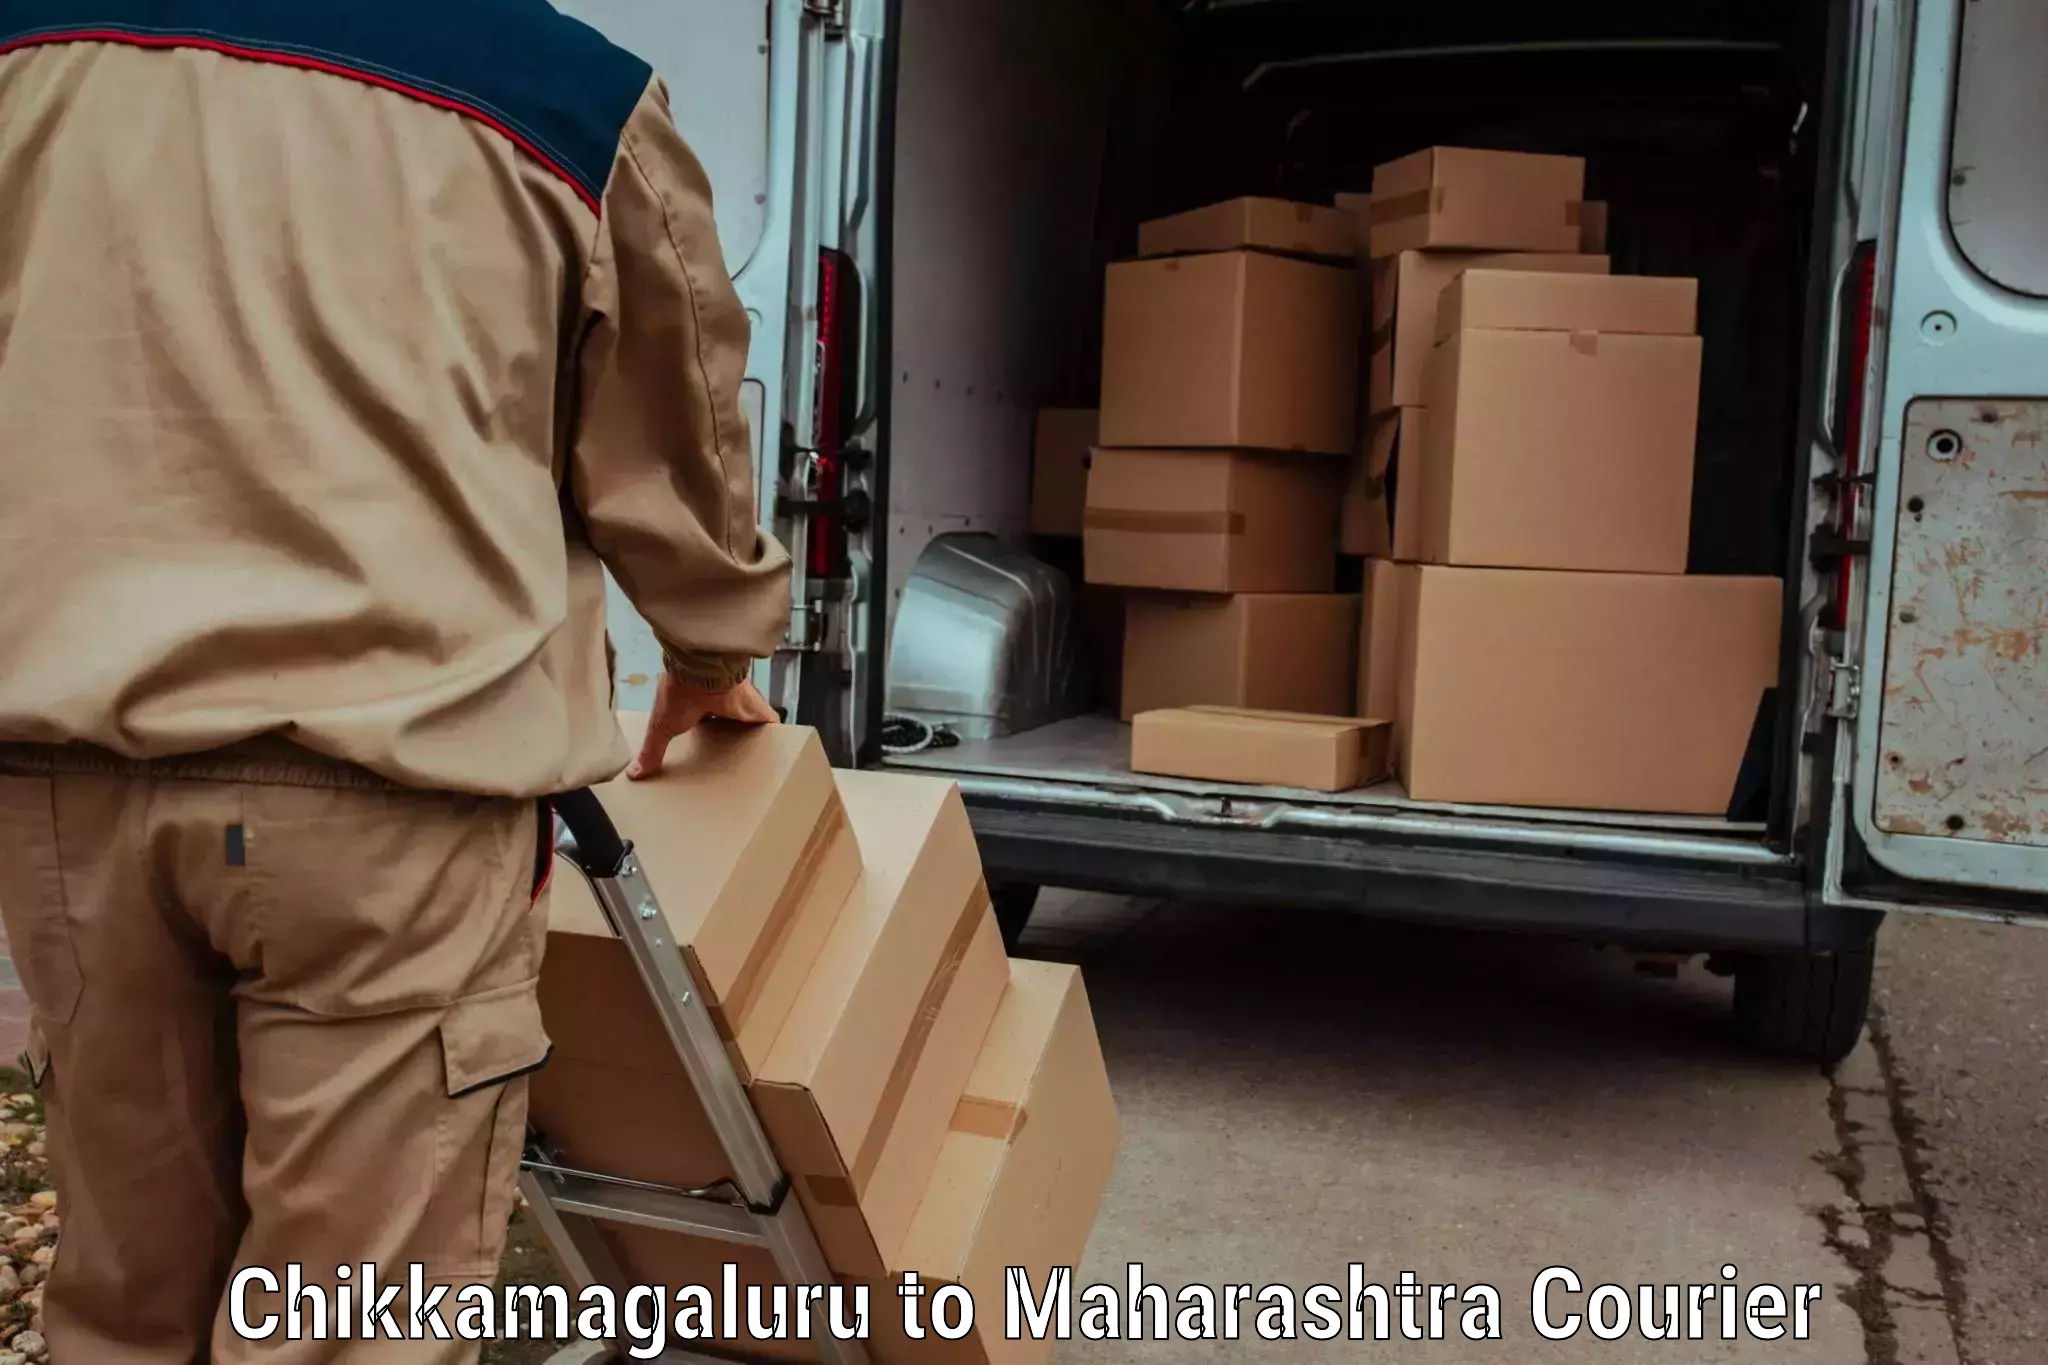 Reliable delivery network Chikkamagaluru to Nagpur